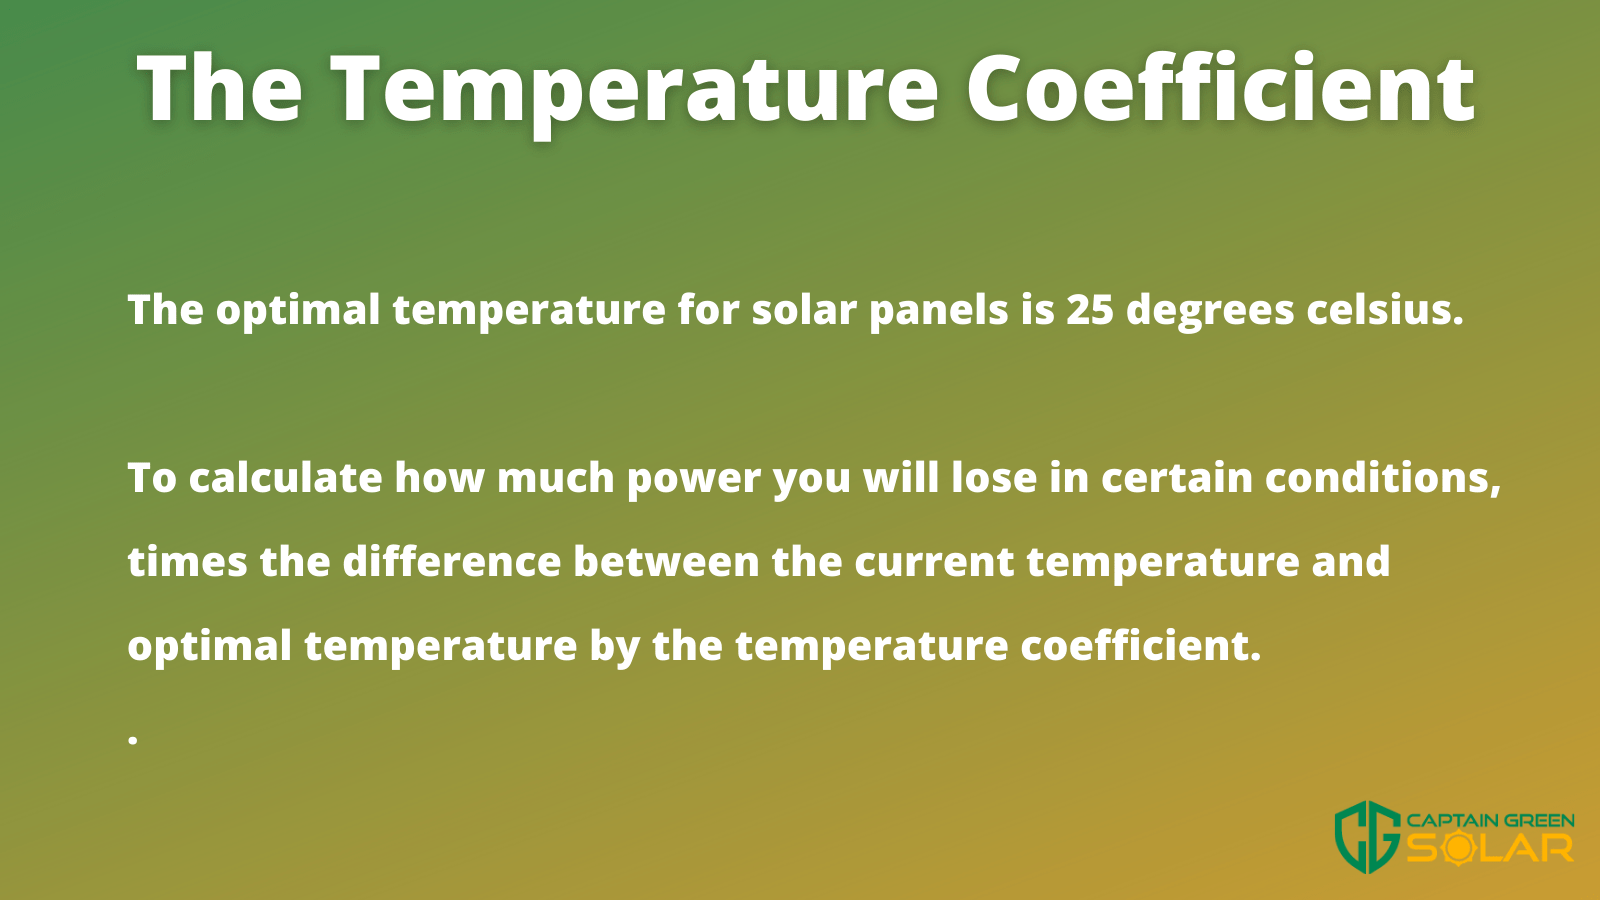 what's the optimal temperature for solar panels